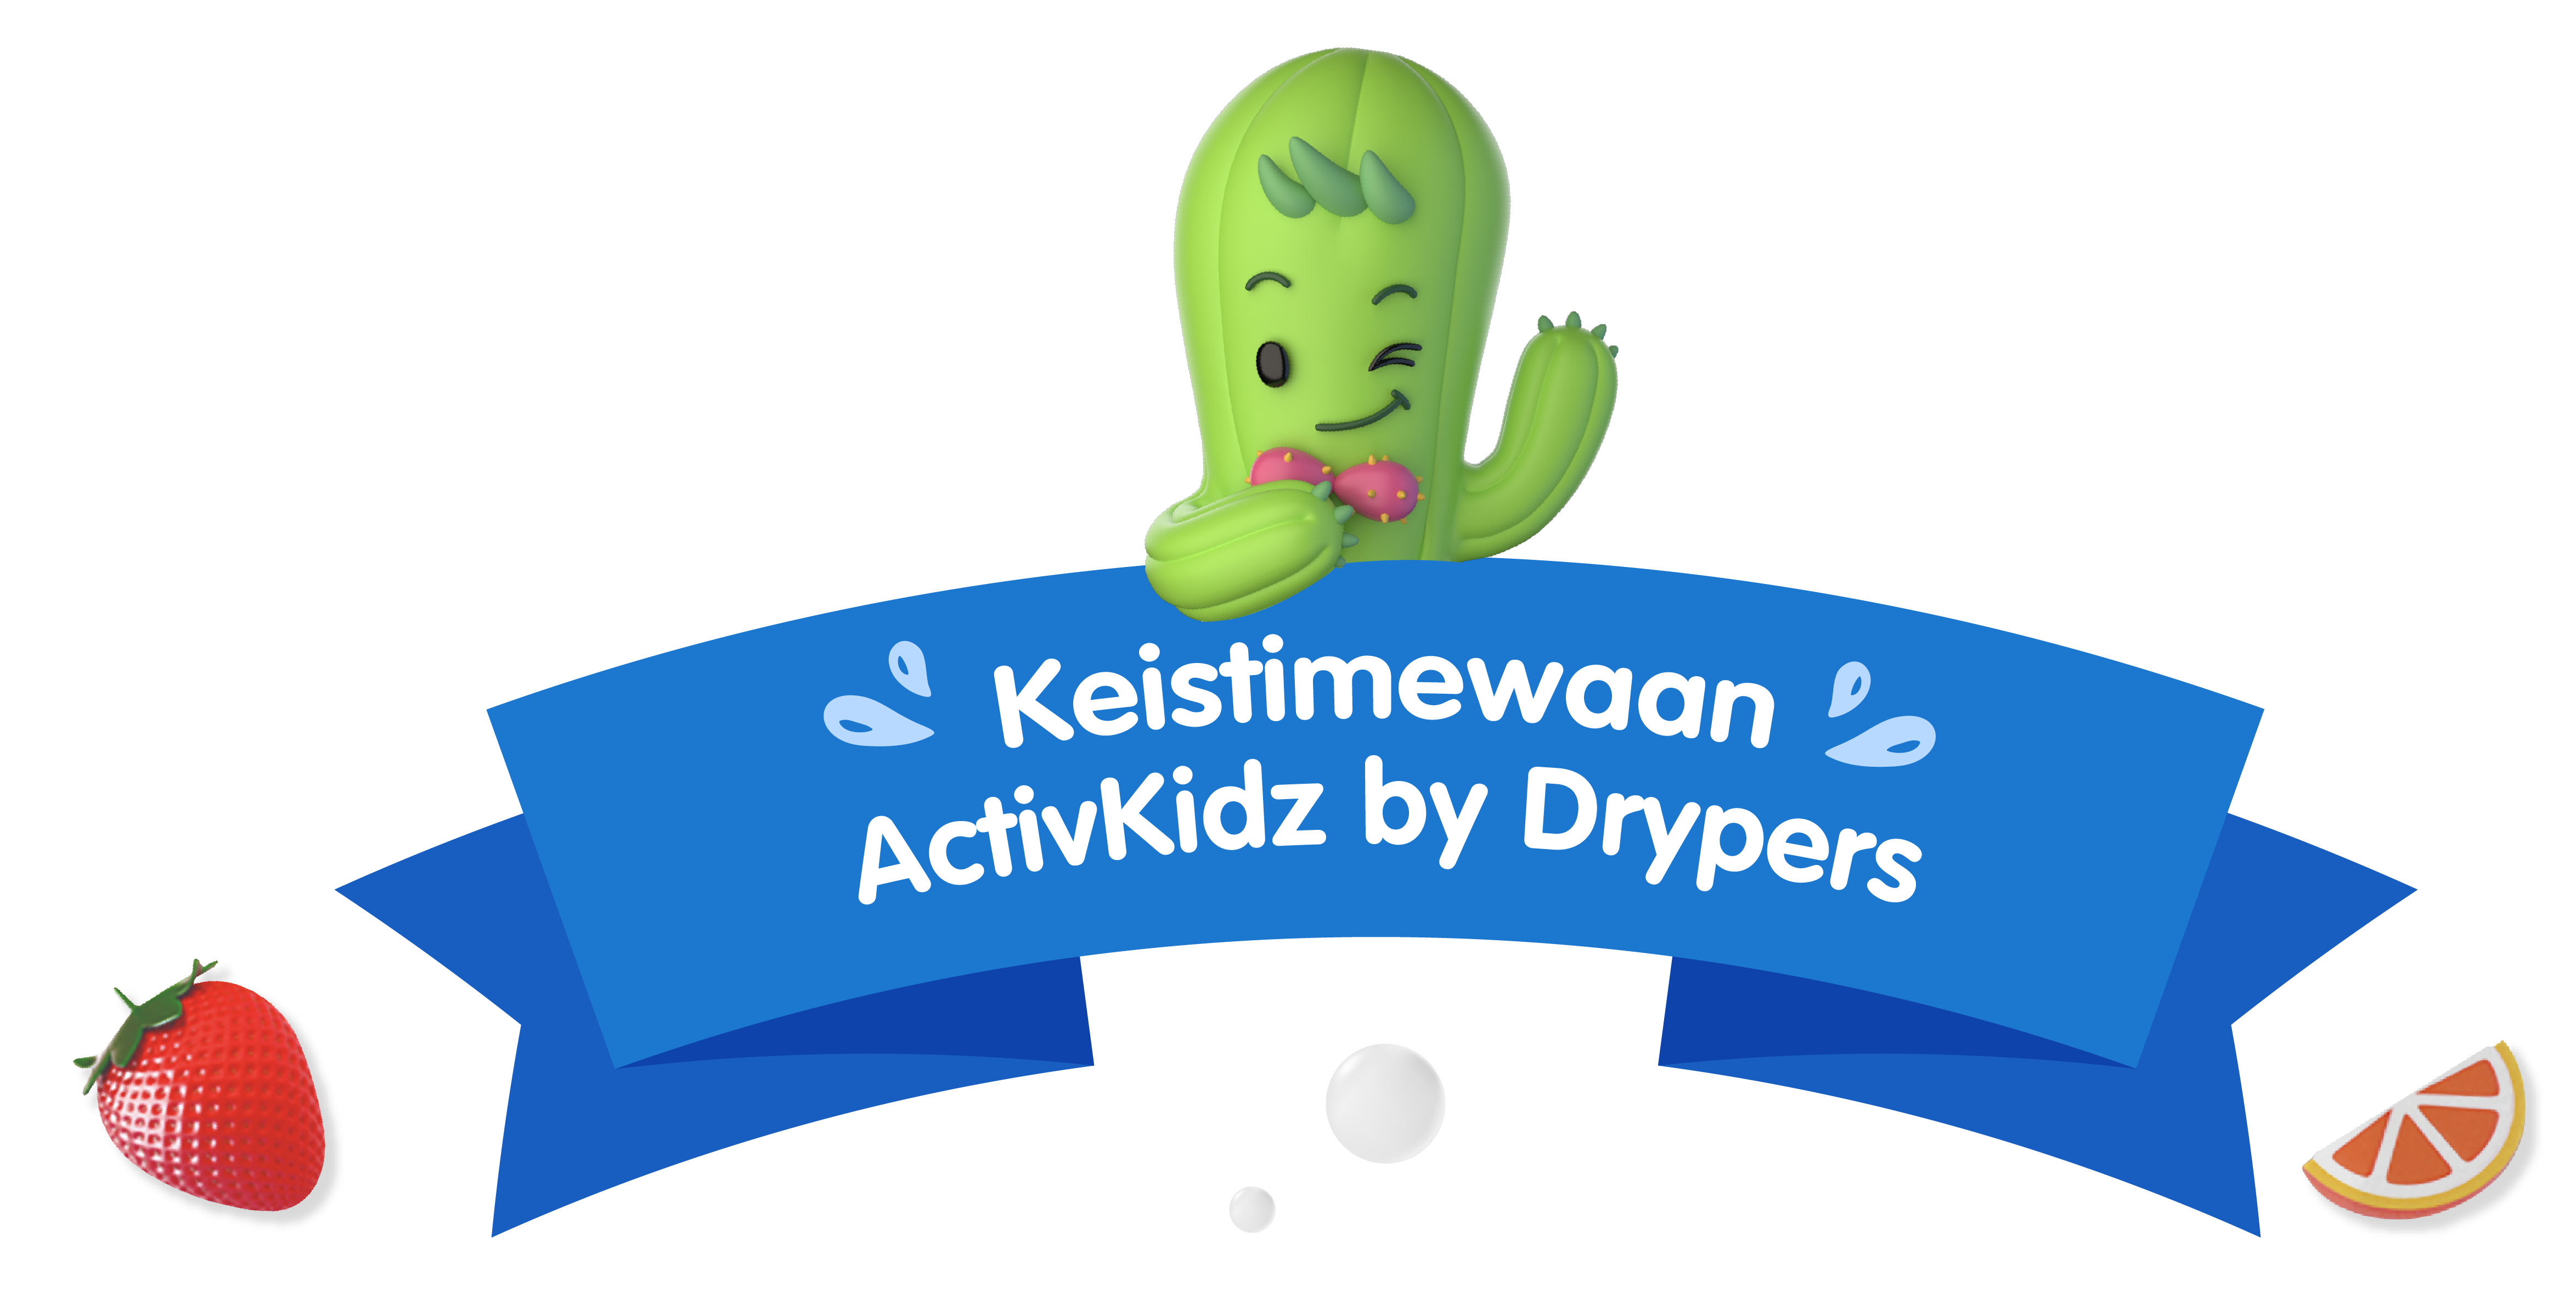 What Makes ActivKidz by Drypers Special